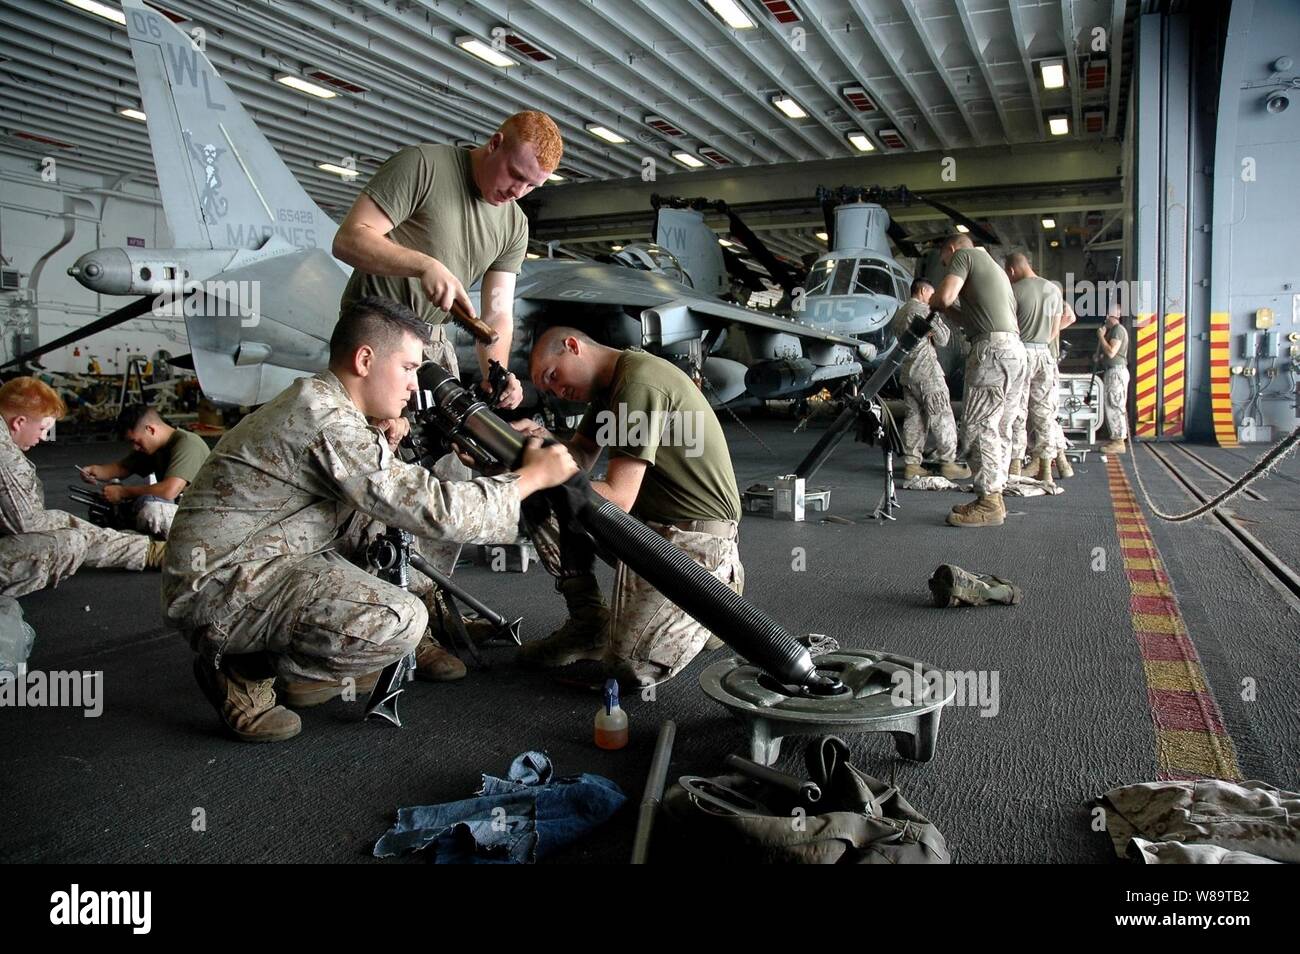 U.S. Marines perform maintenance on their equipment in the hangar bay of the USS Boxer (LHD 4) as the ship operates in the Pacific Ocean on Aug. 15, 2006.   The Marines are part of Weapons Company, 2nd Battalion, 4th Marines, attached to the 15th Marine Expeditionary Unit. Stock Photo